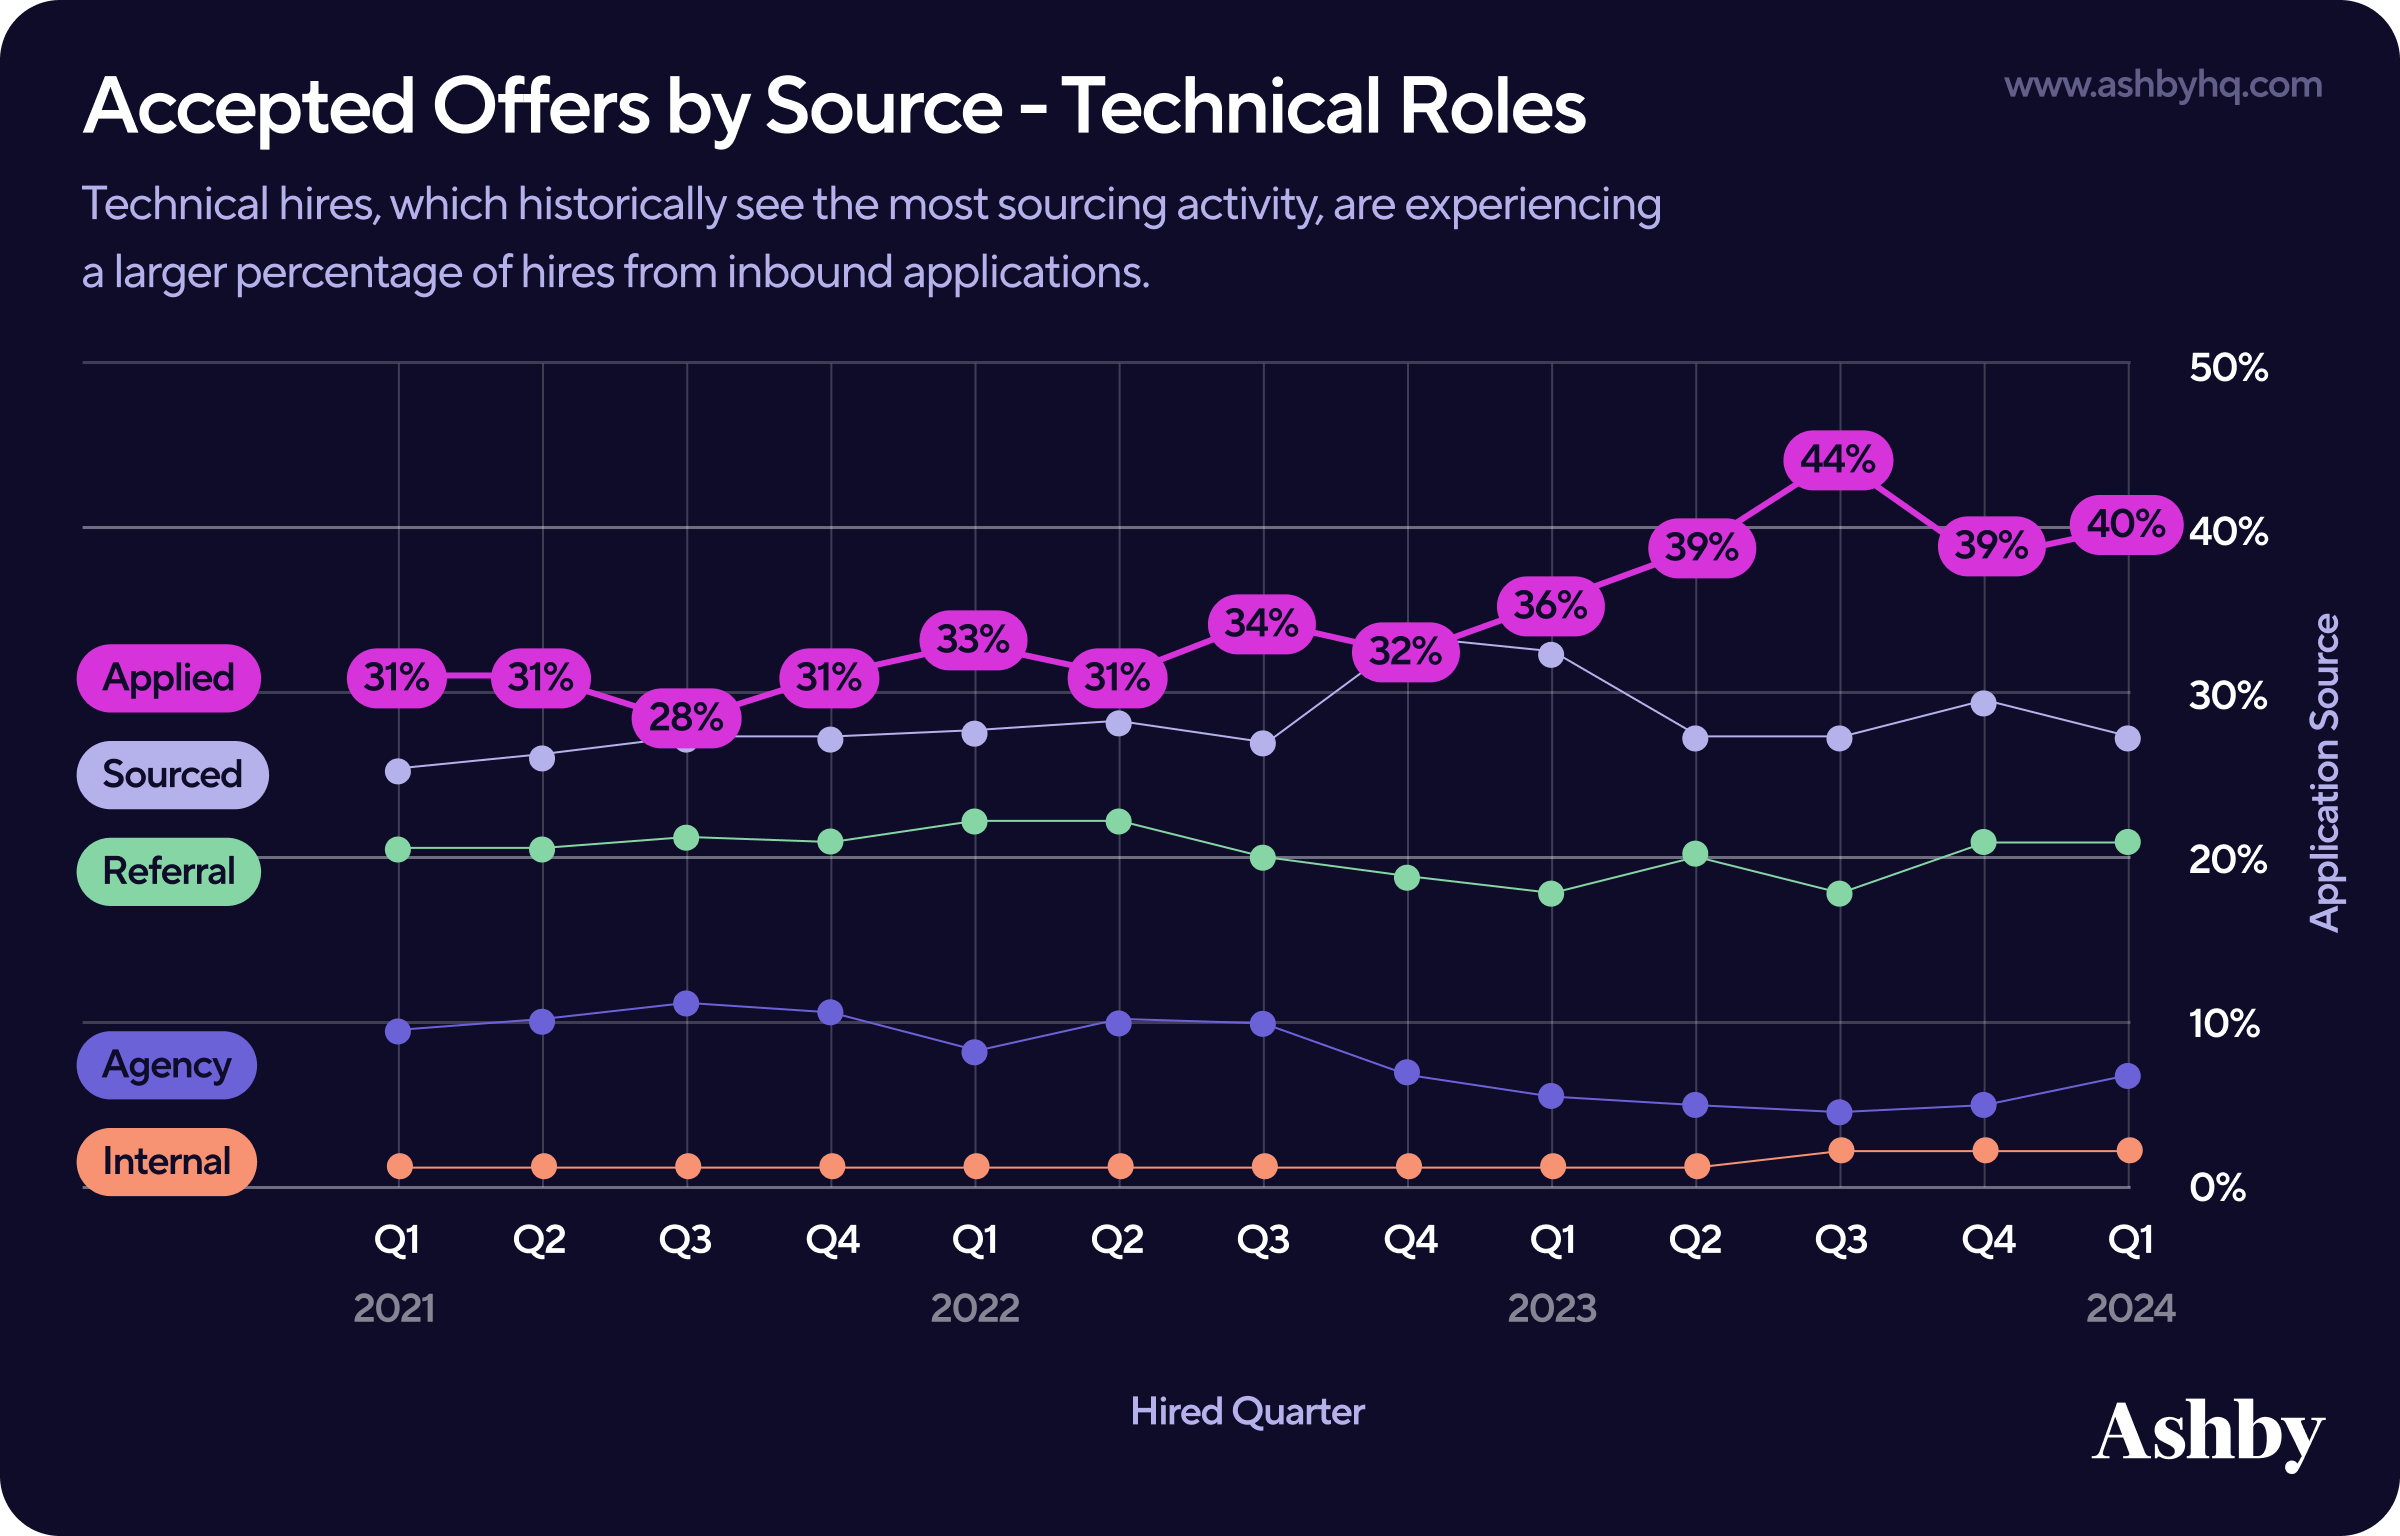 Accepted Offers by Source, Technical Roles